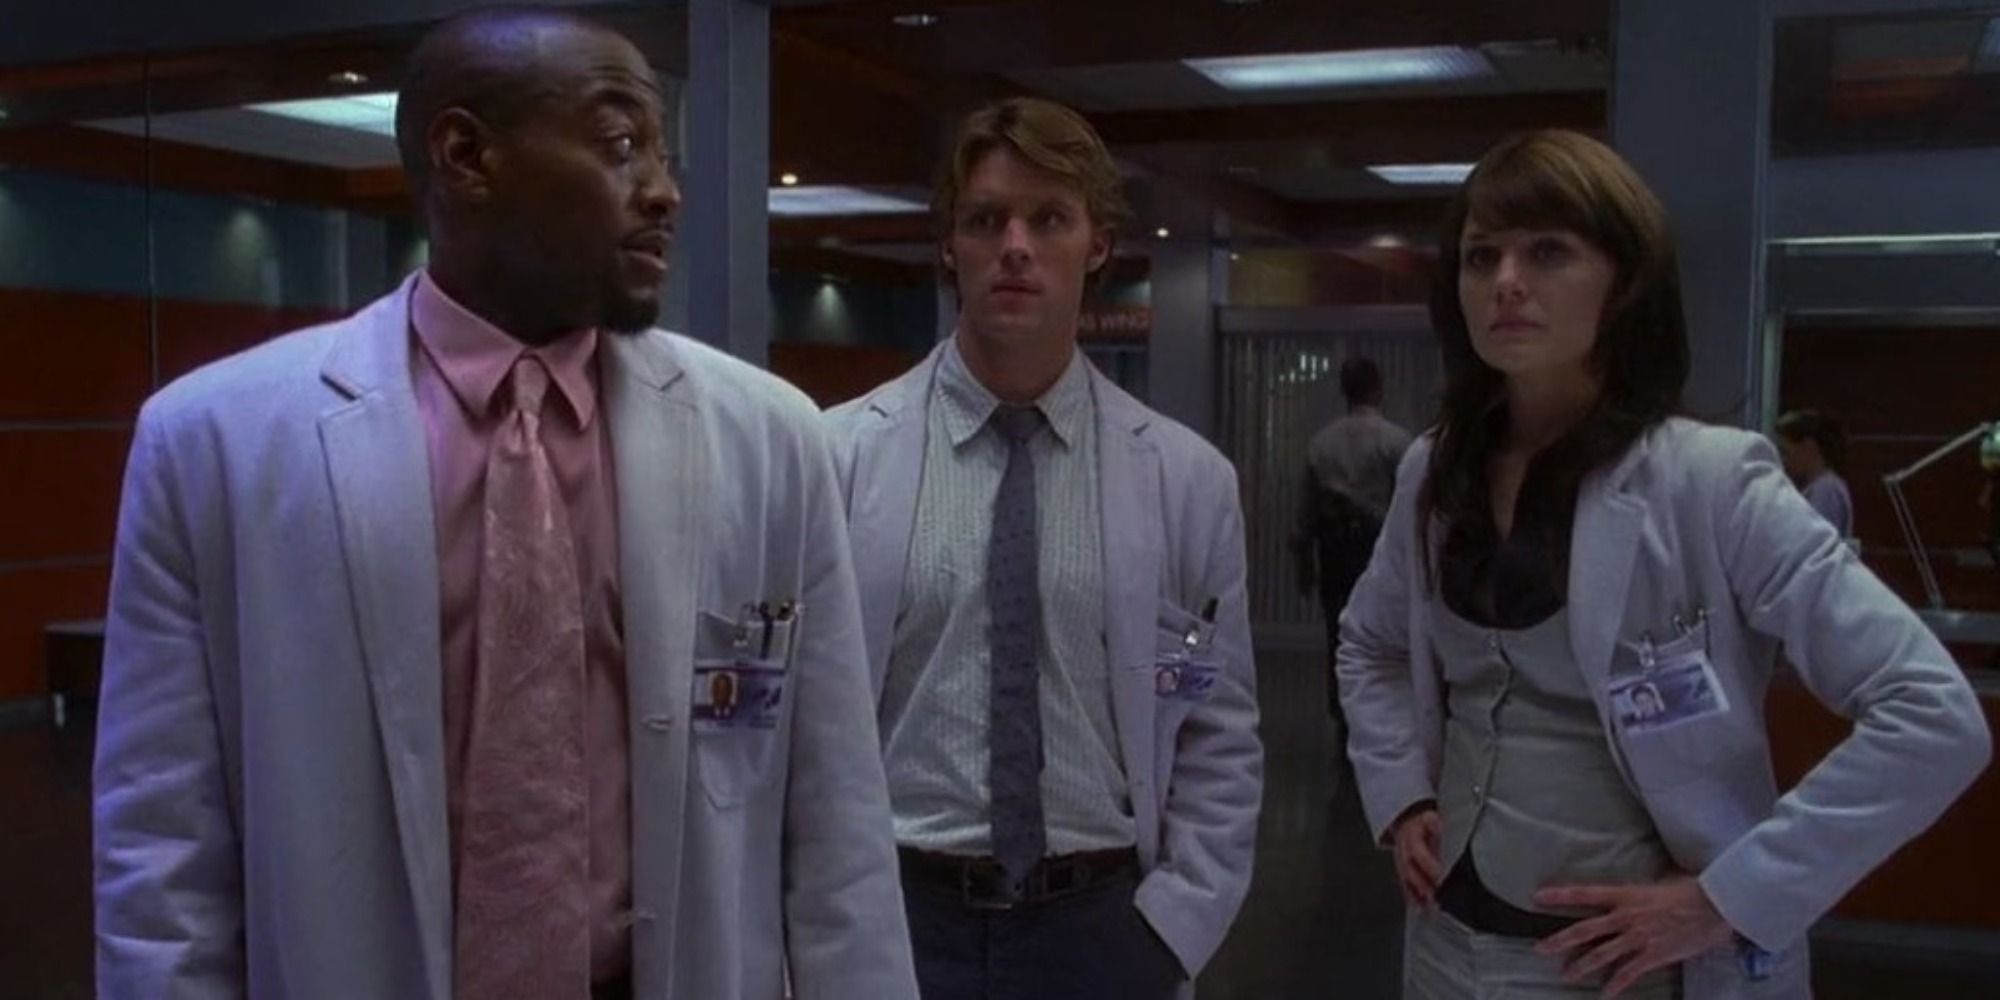 Foreman, Chase and Cameron in white lab coats